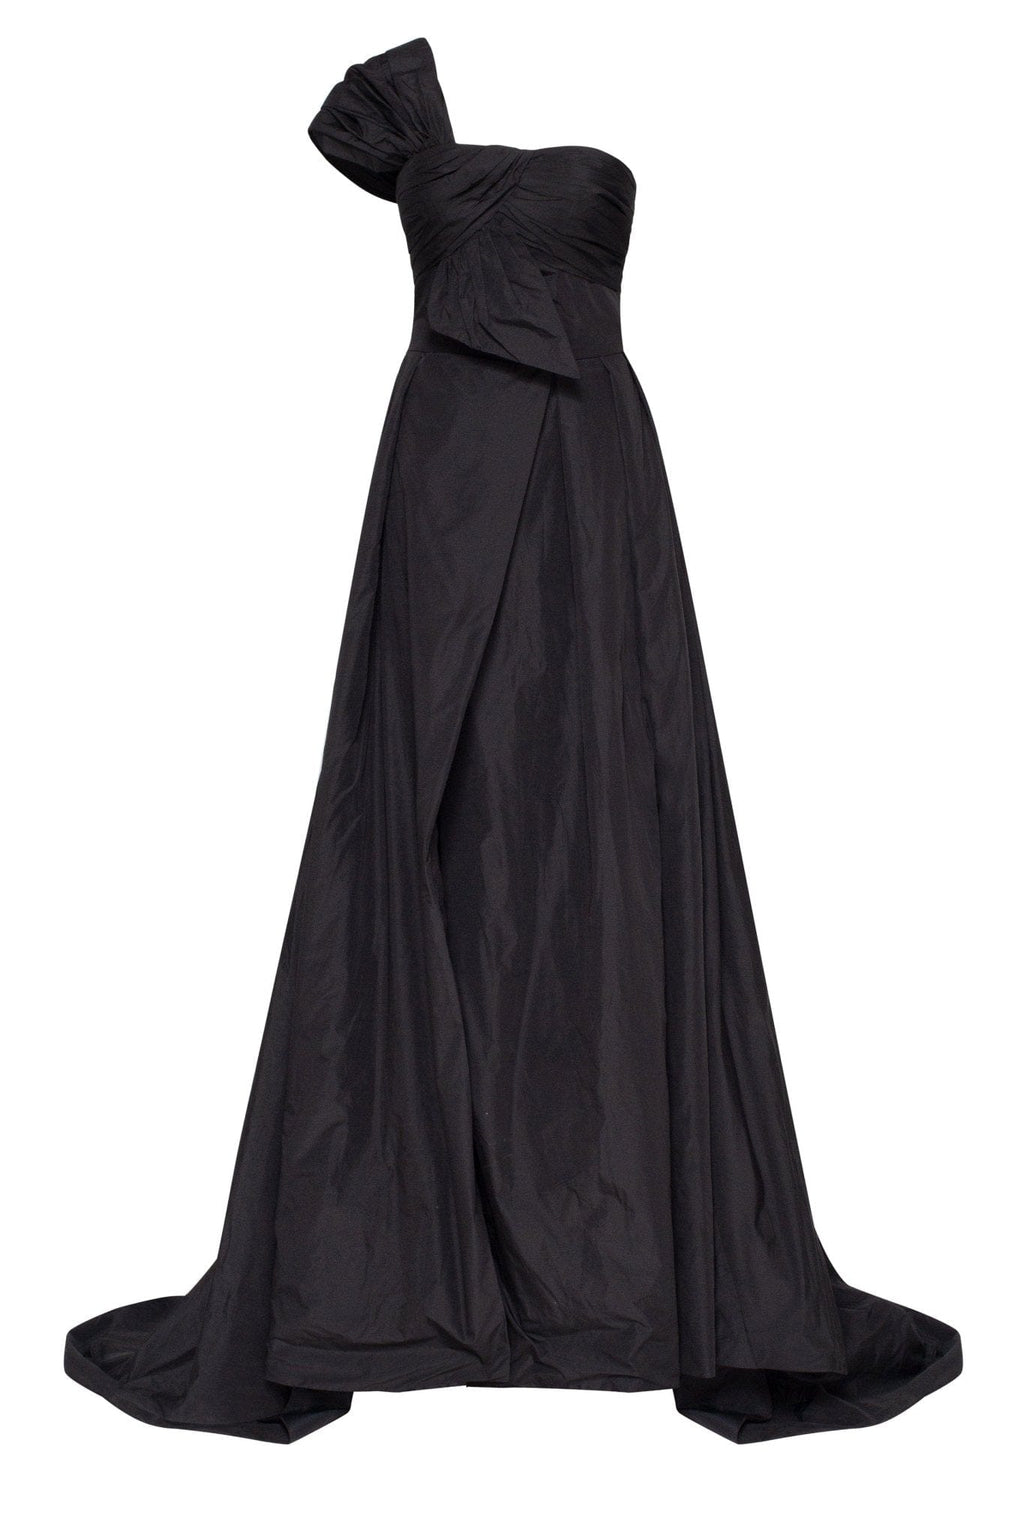 Black taffeta evening gown with a high slit and one-shoulder wrap top - Milla